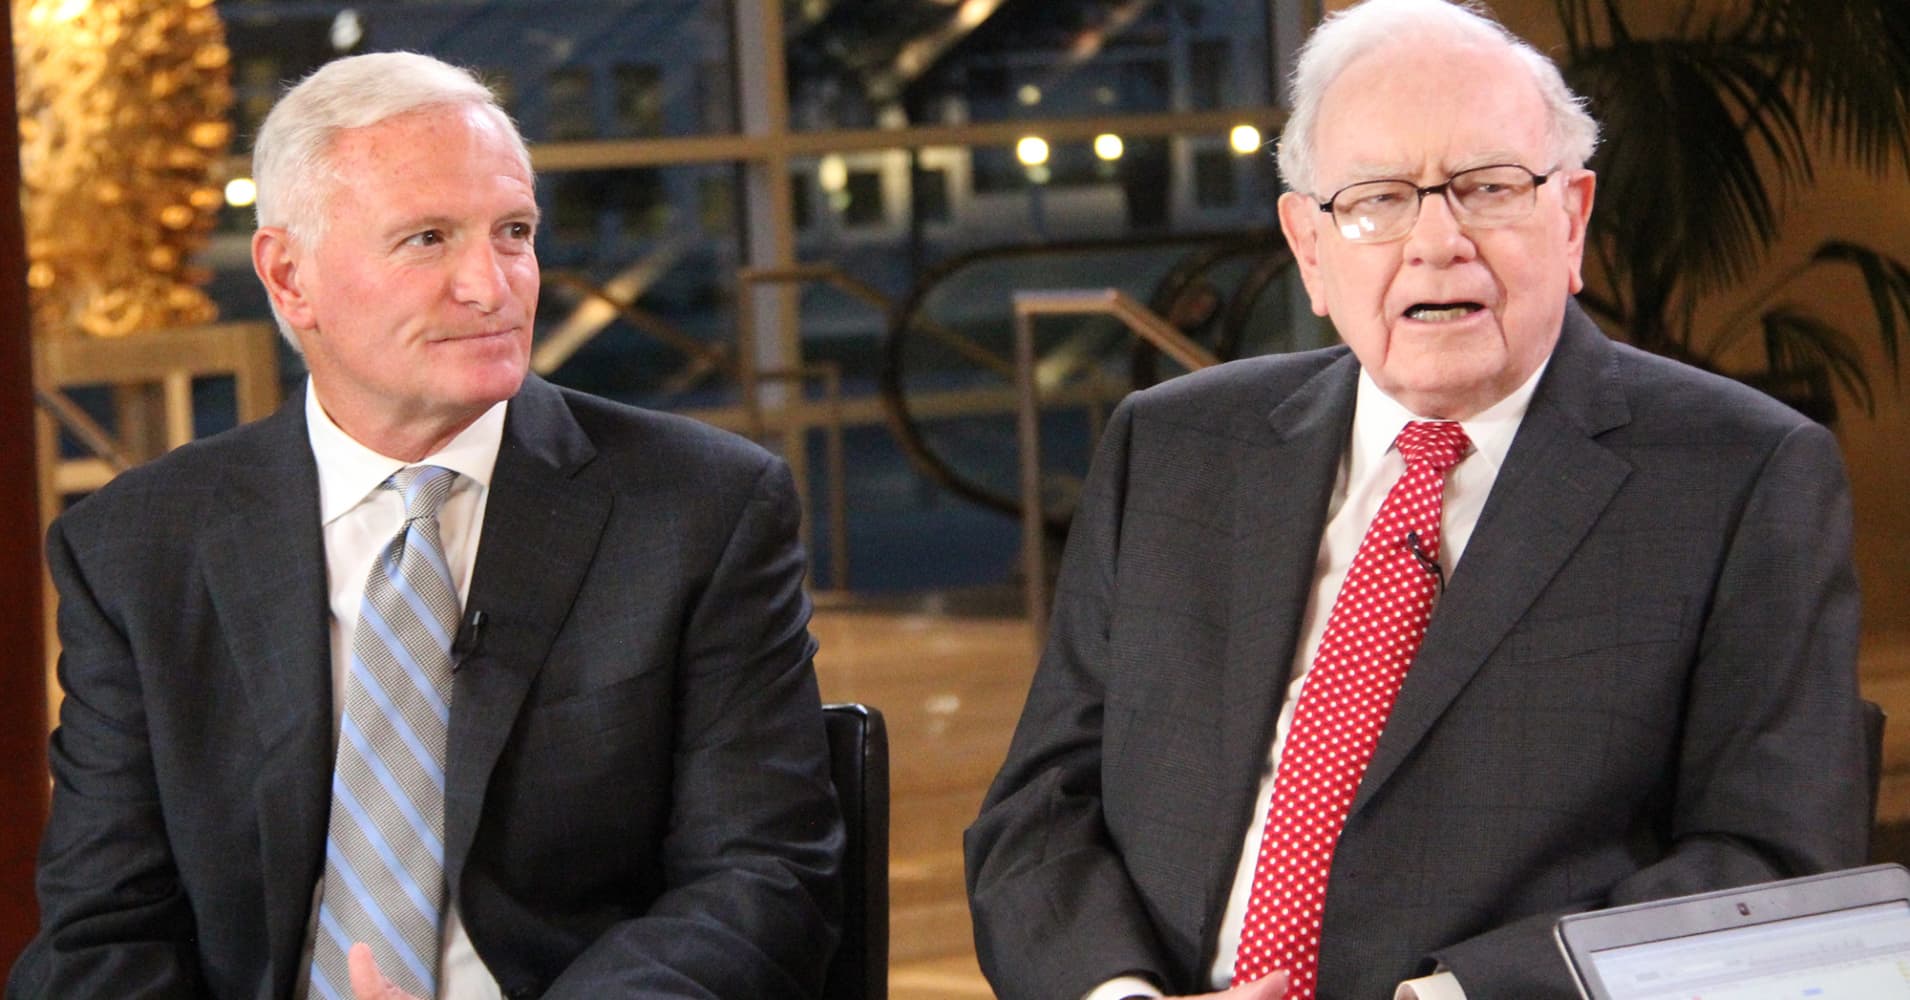 Jimmy Haslam, CEO of Pilot Flying J. and Warren Buffett, Chairman and CEO of Berkshire Hathaway.